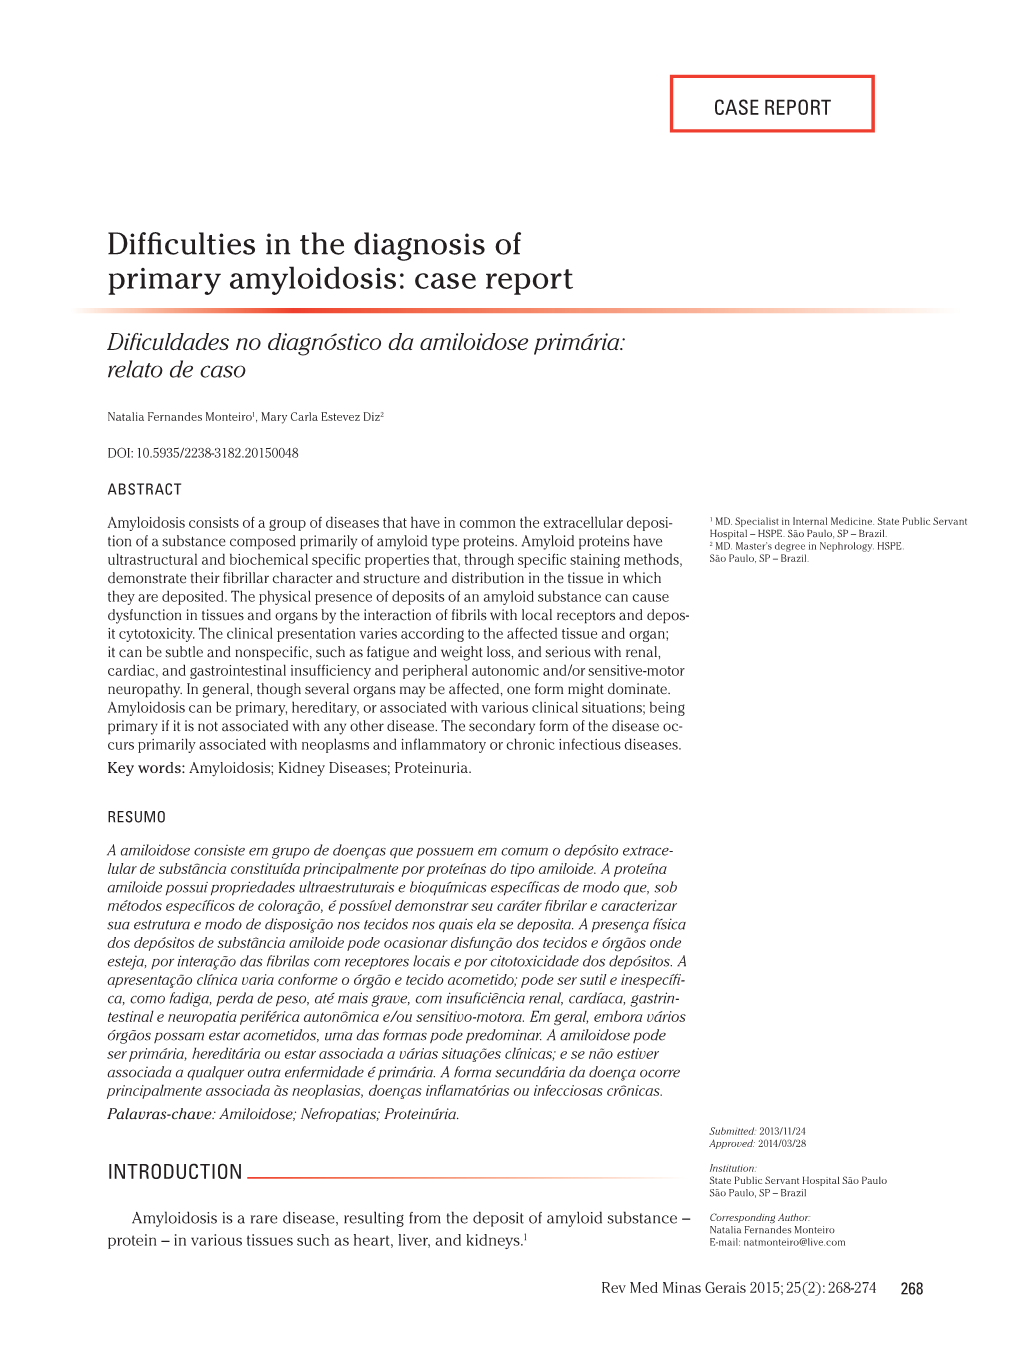 Difficulties in the Diagnosis of Primary Amyloidosis: Case Report